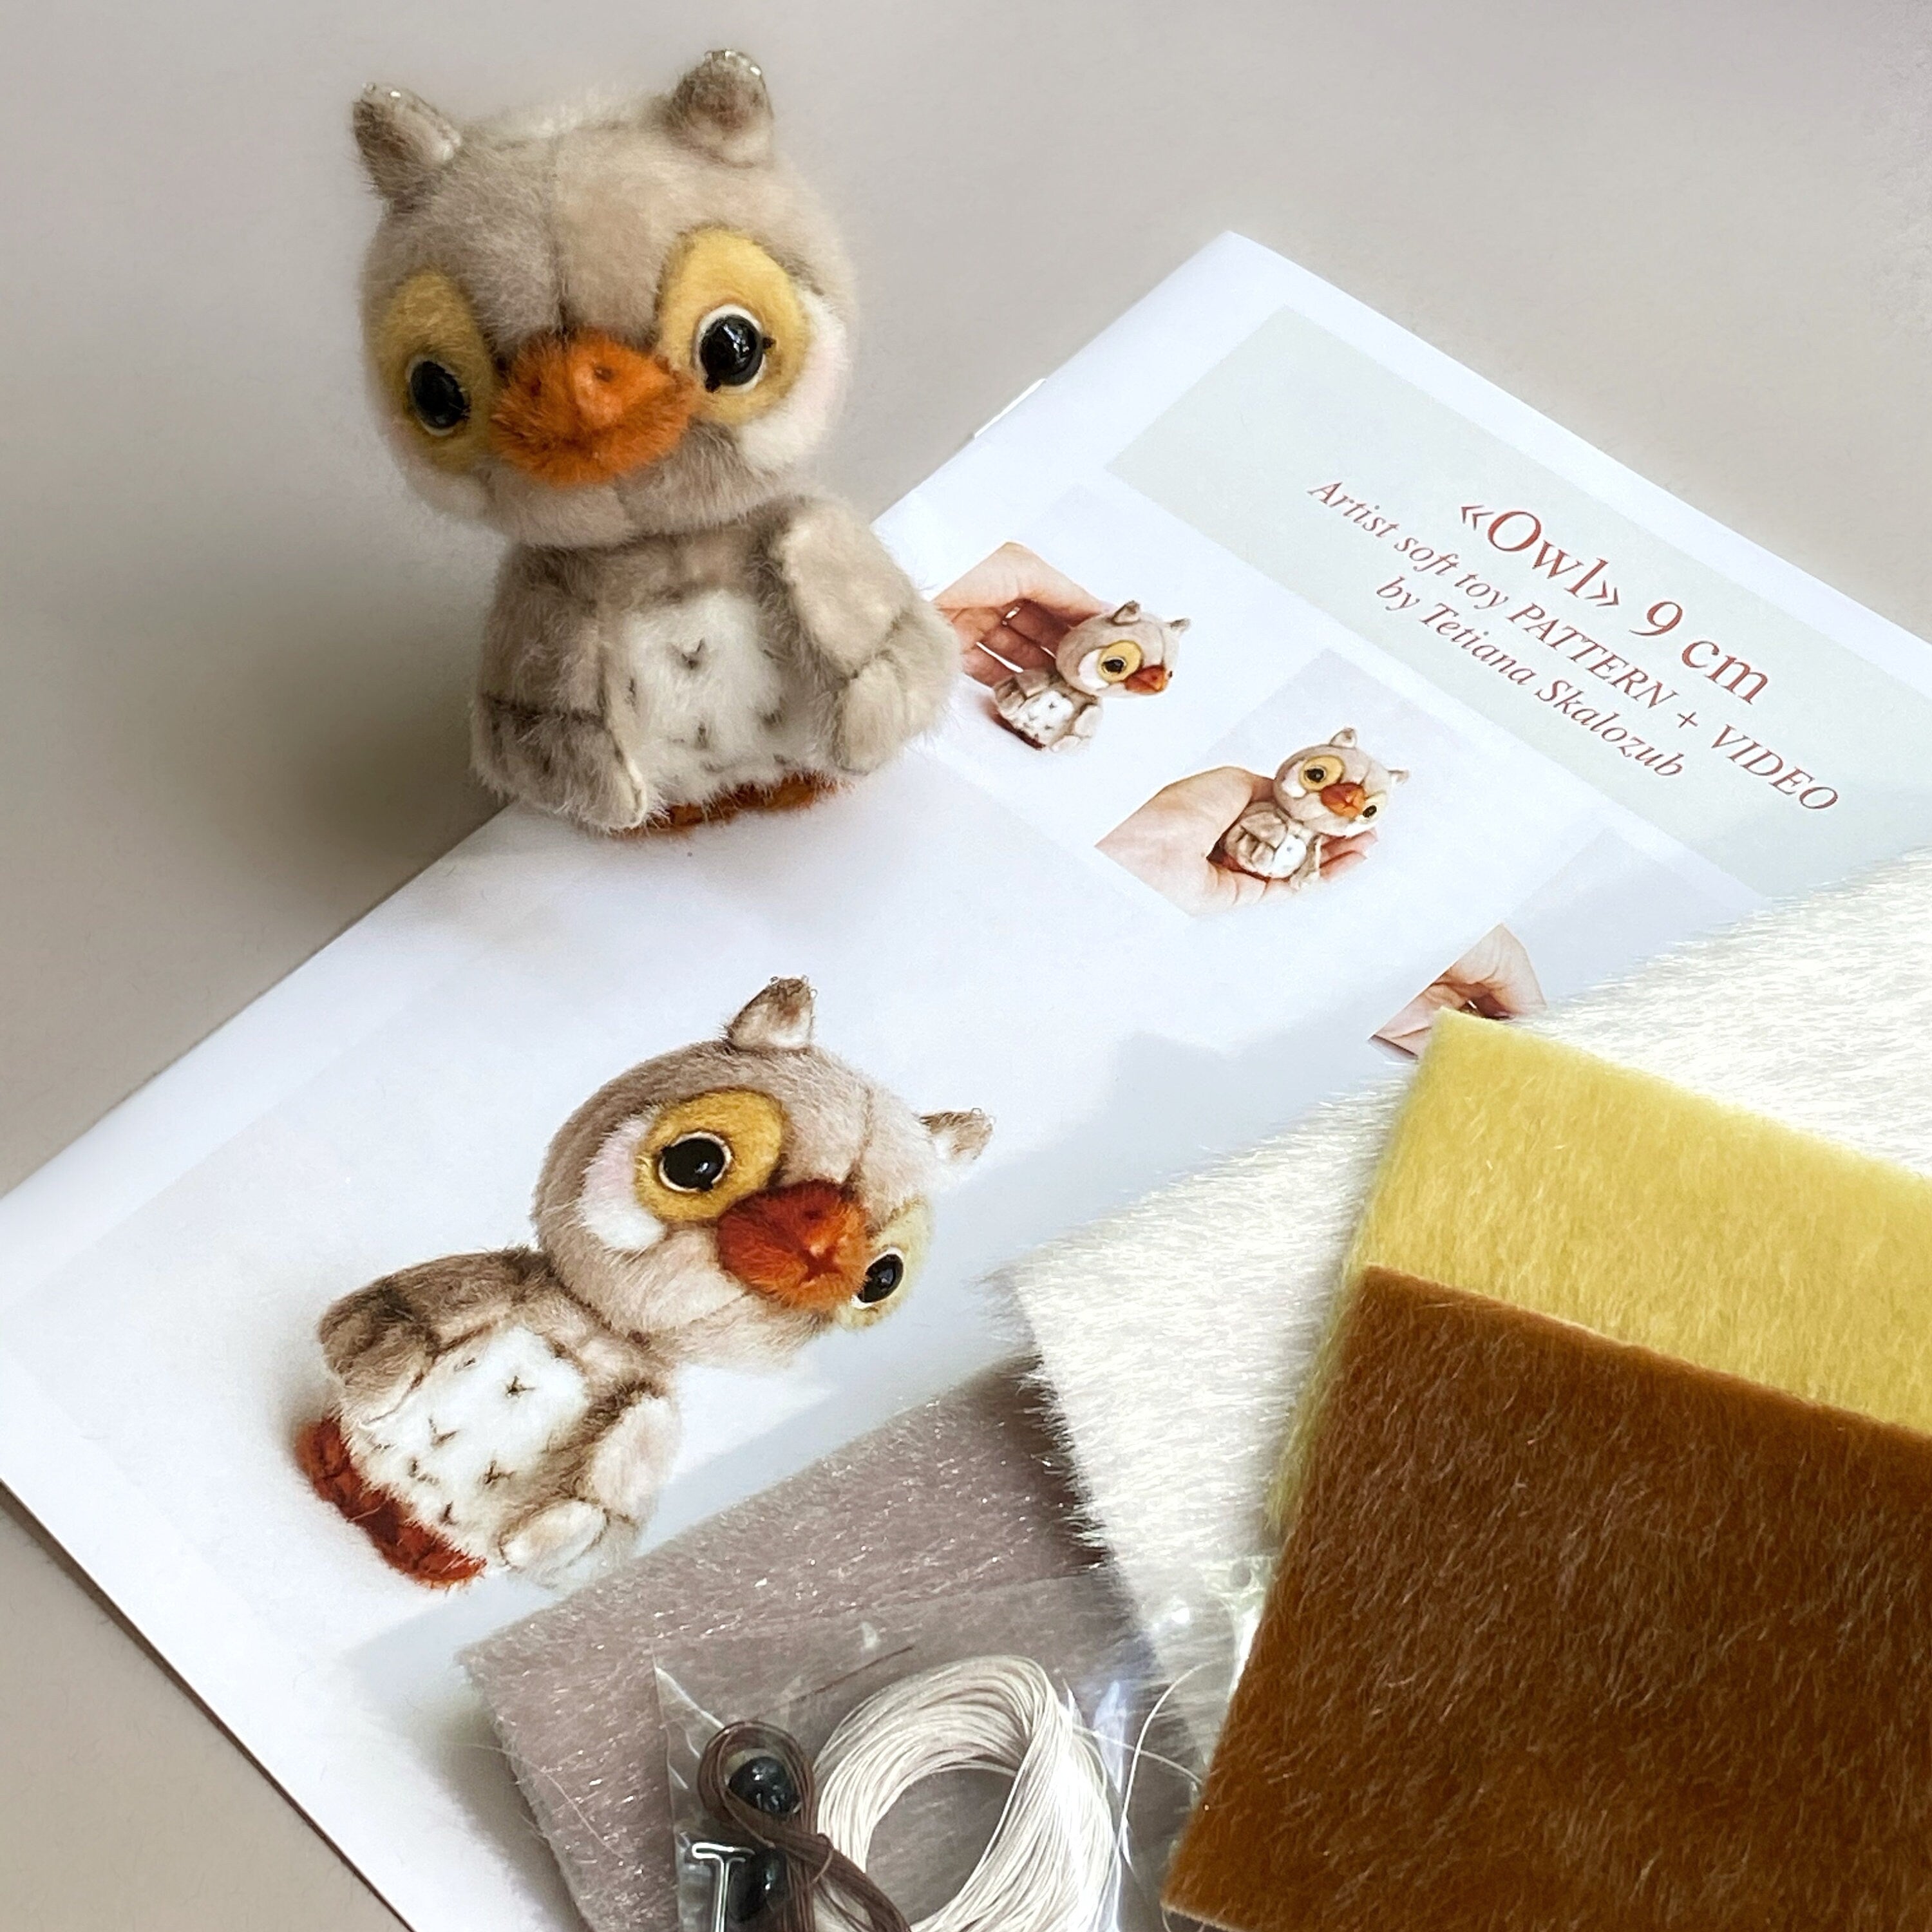 Owl - Sewing KIT, stuffed toy bird diy, gift for creative person, sewing pattern, how to make a toy, Christmas toy on the tree